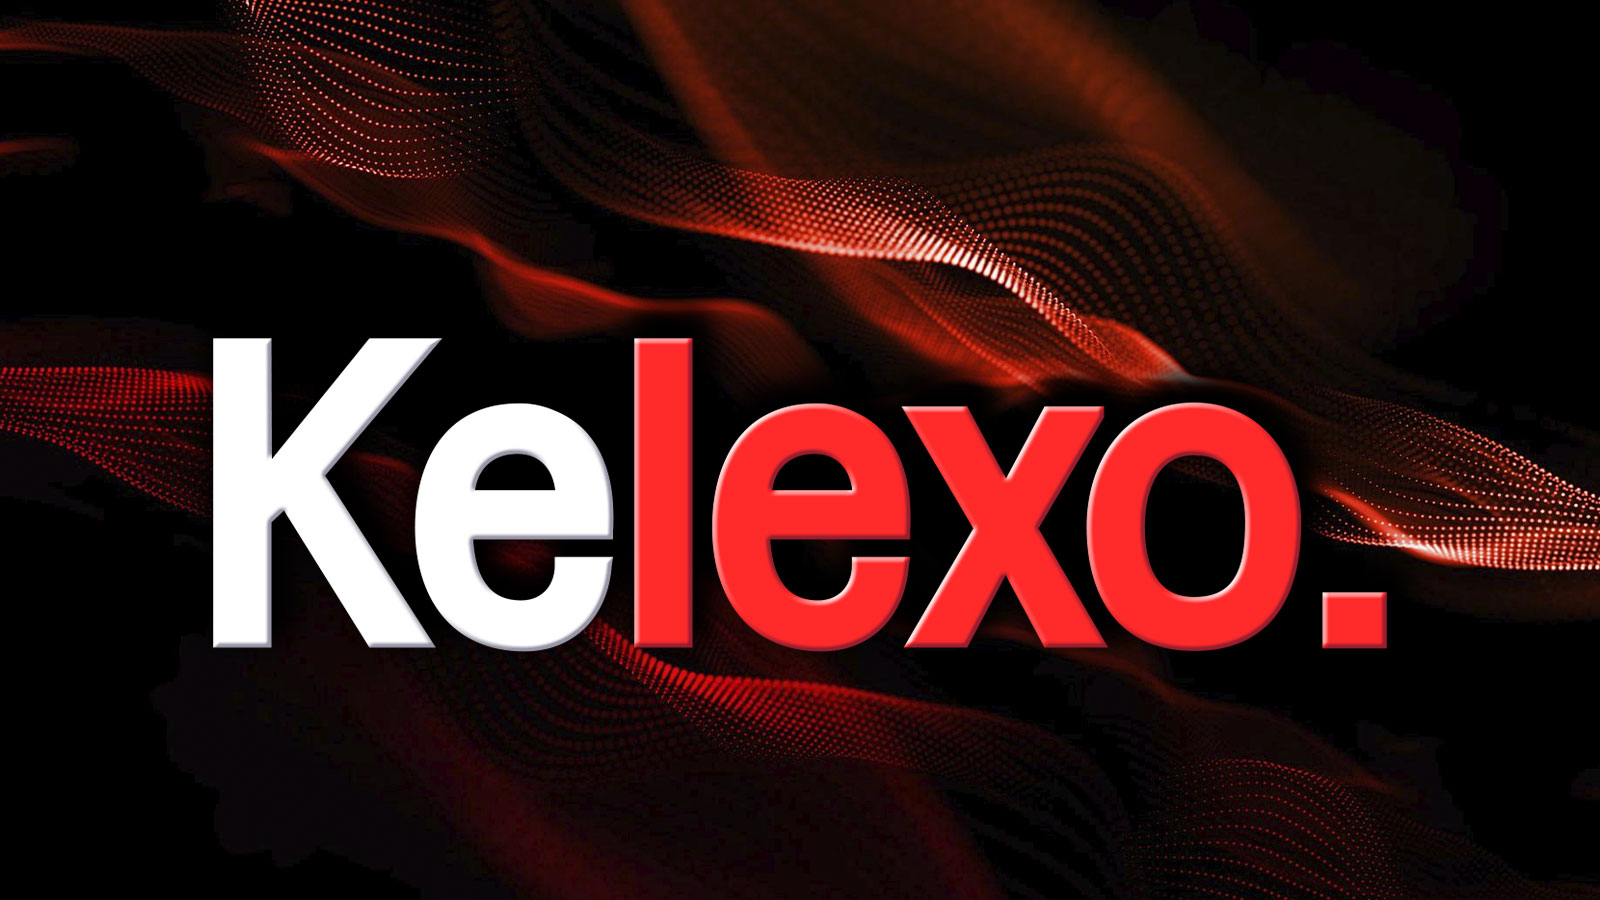 Kelexo (KLXO) Pre-Sale Might be Spotlighted by Altcoin Traders in March while Ethereum (ETH), Binance Coin (BNB) Revisit Multi-Month Highs